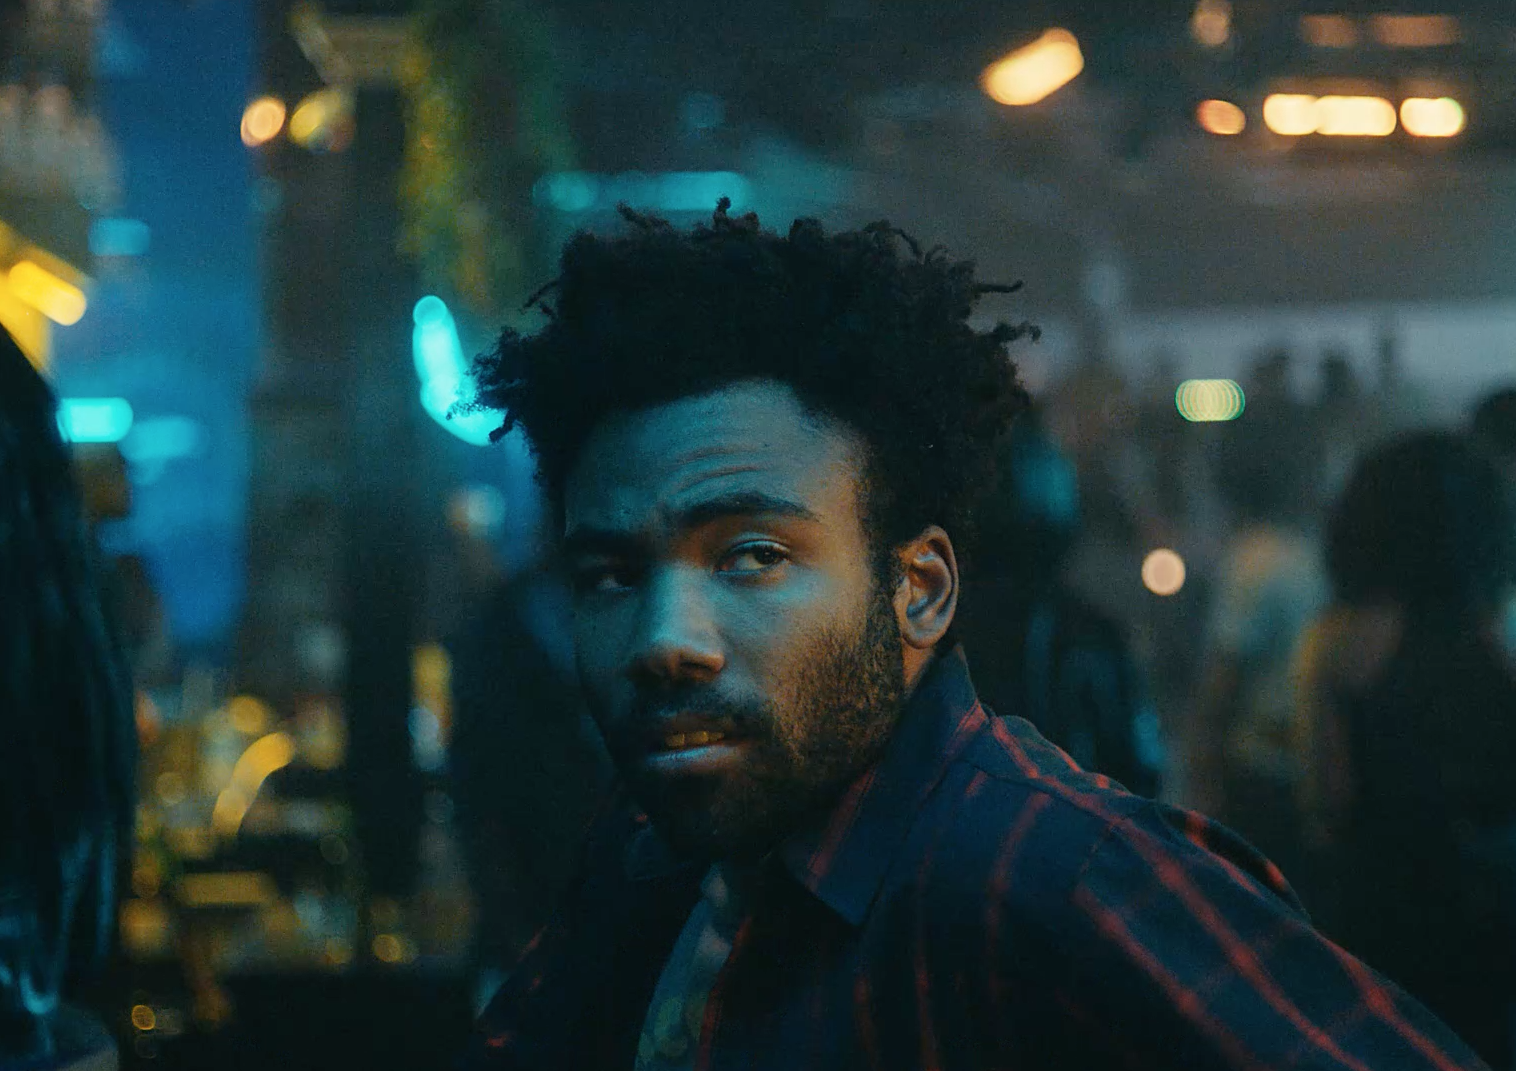 In an article about the show "Atlanta", a screencap of the show's main character Earn,